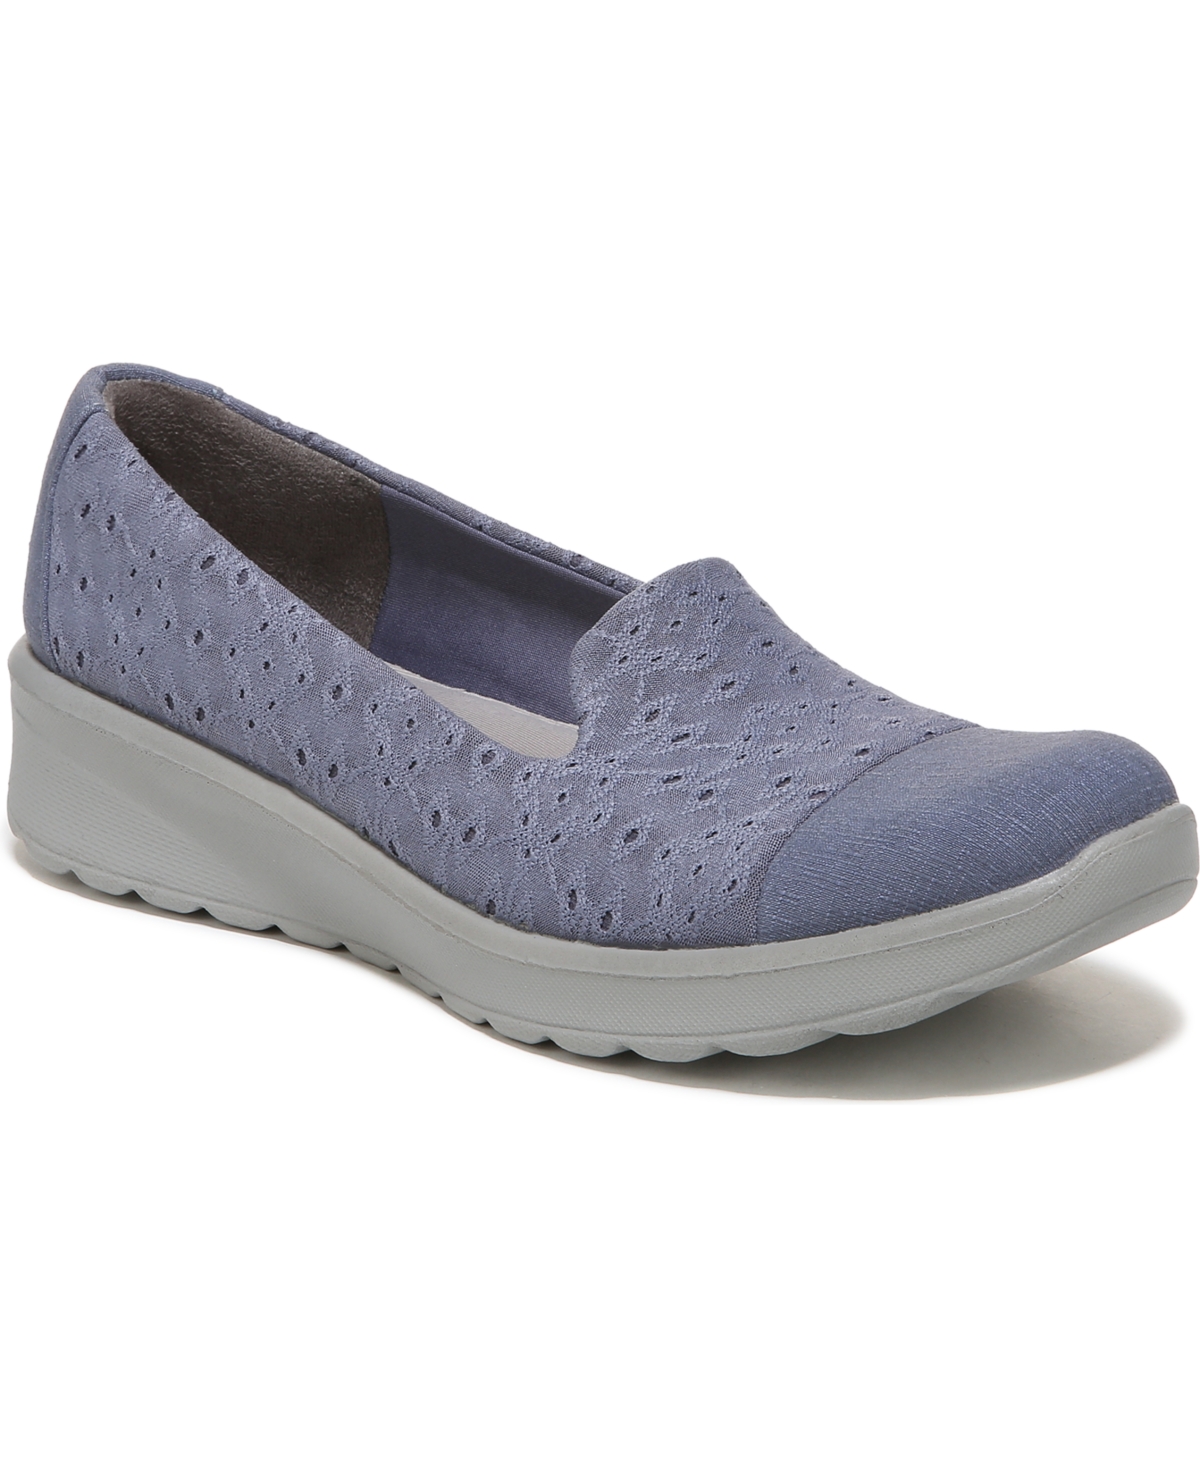 BZees Galaxy Washable Slip-ons Women's Shoes